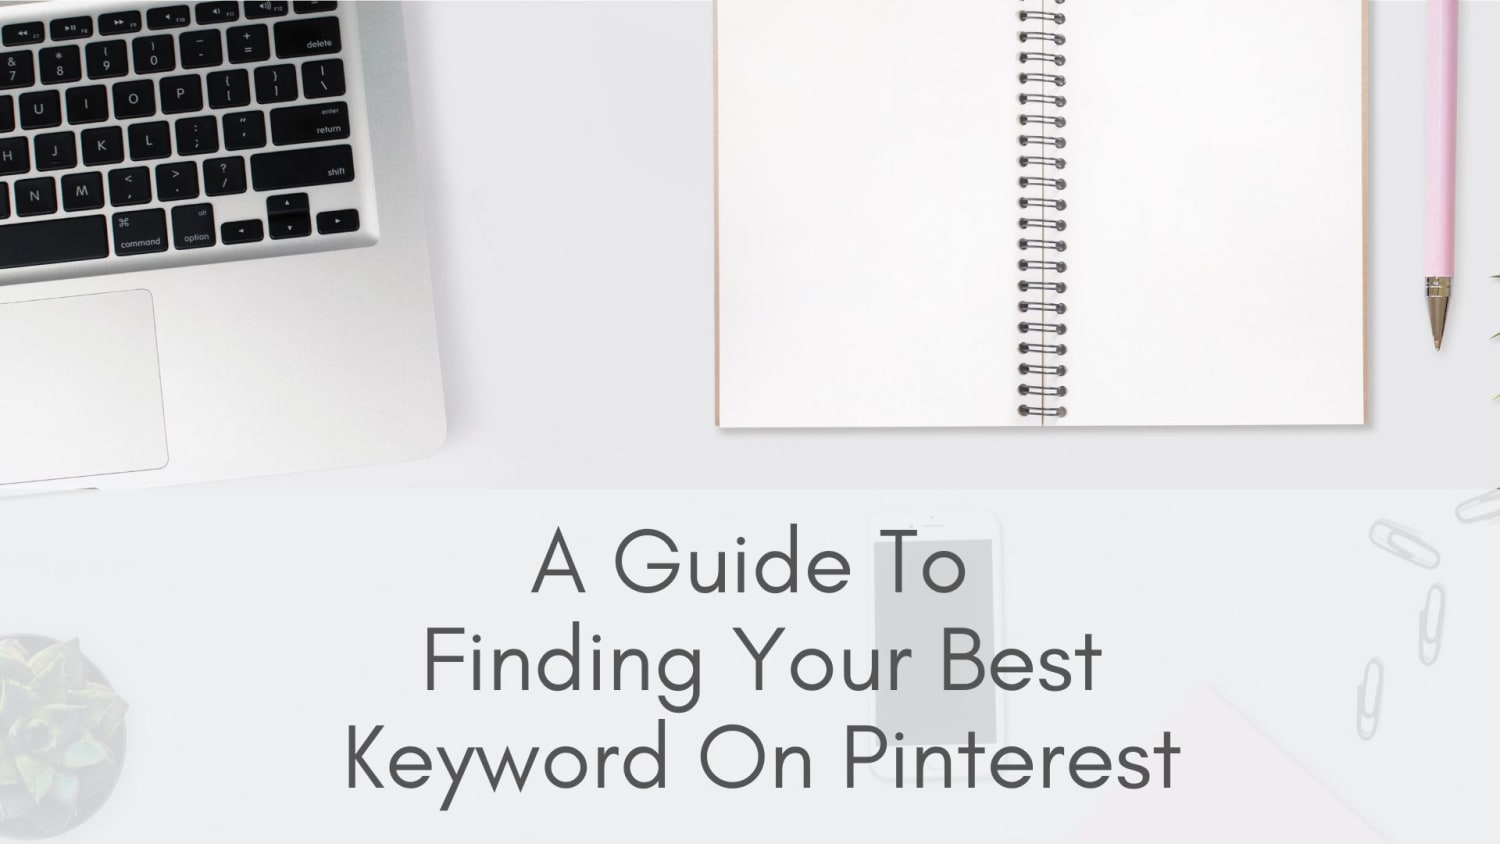 A Guide To Finding Your Best Keyword On Pinterest